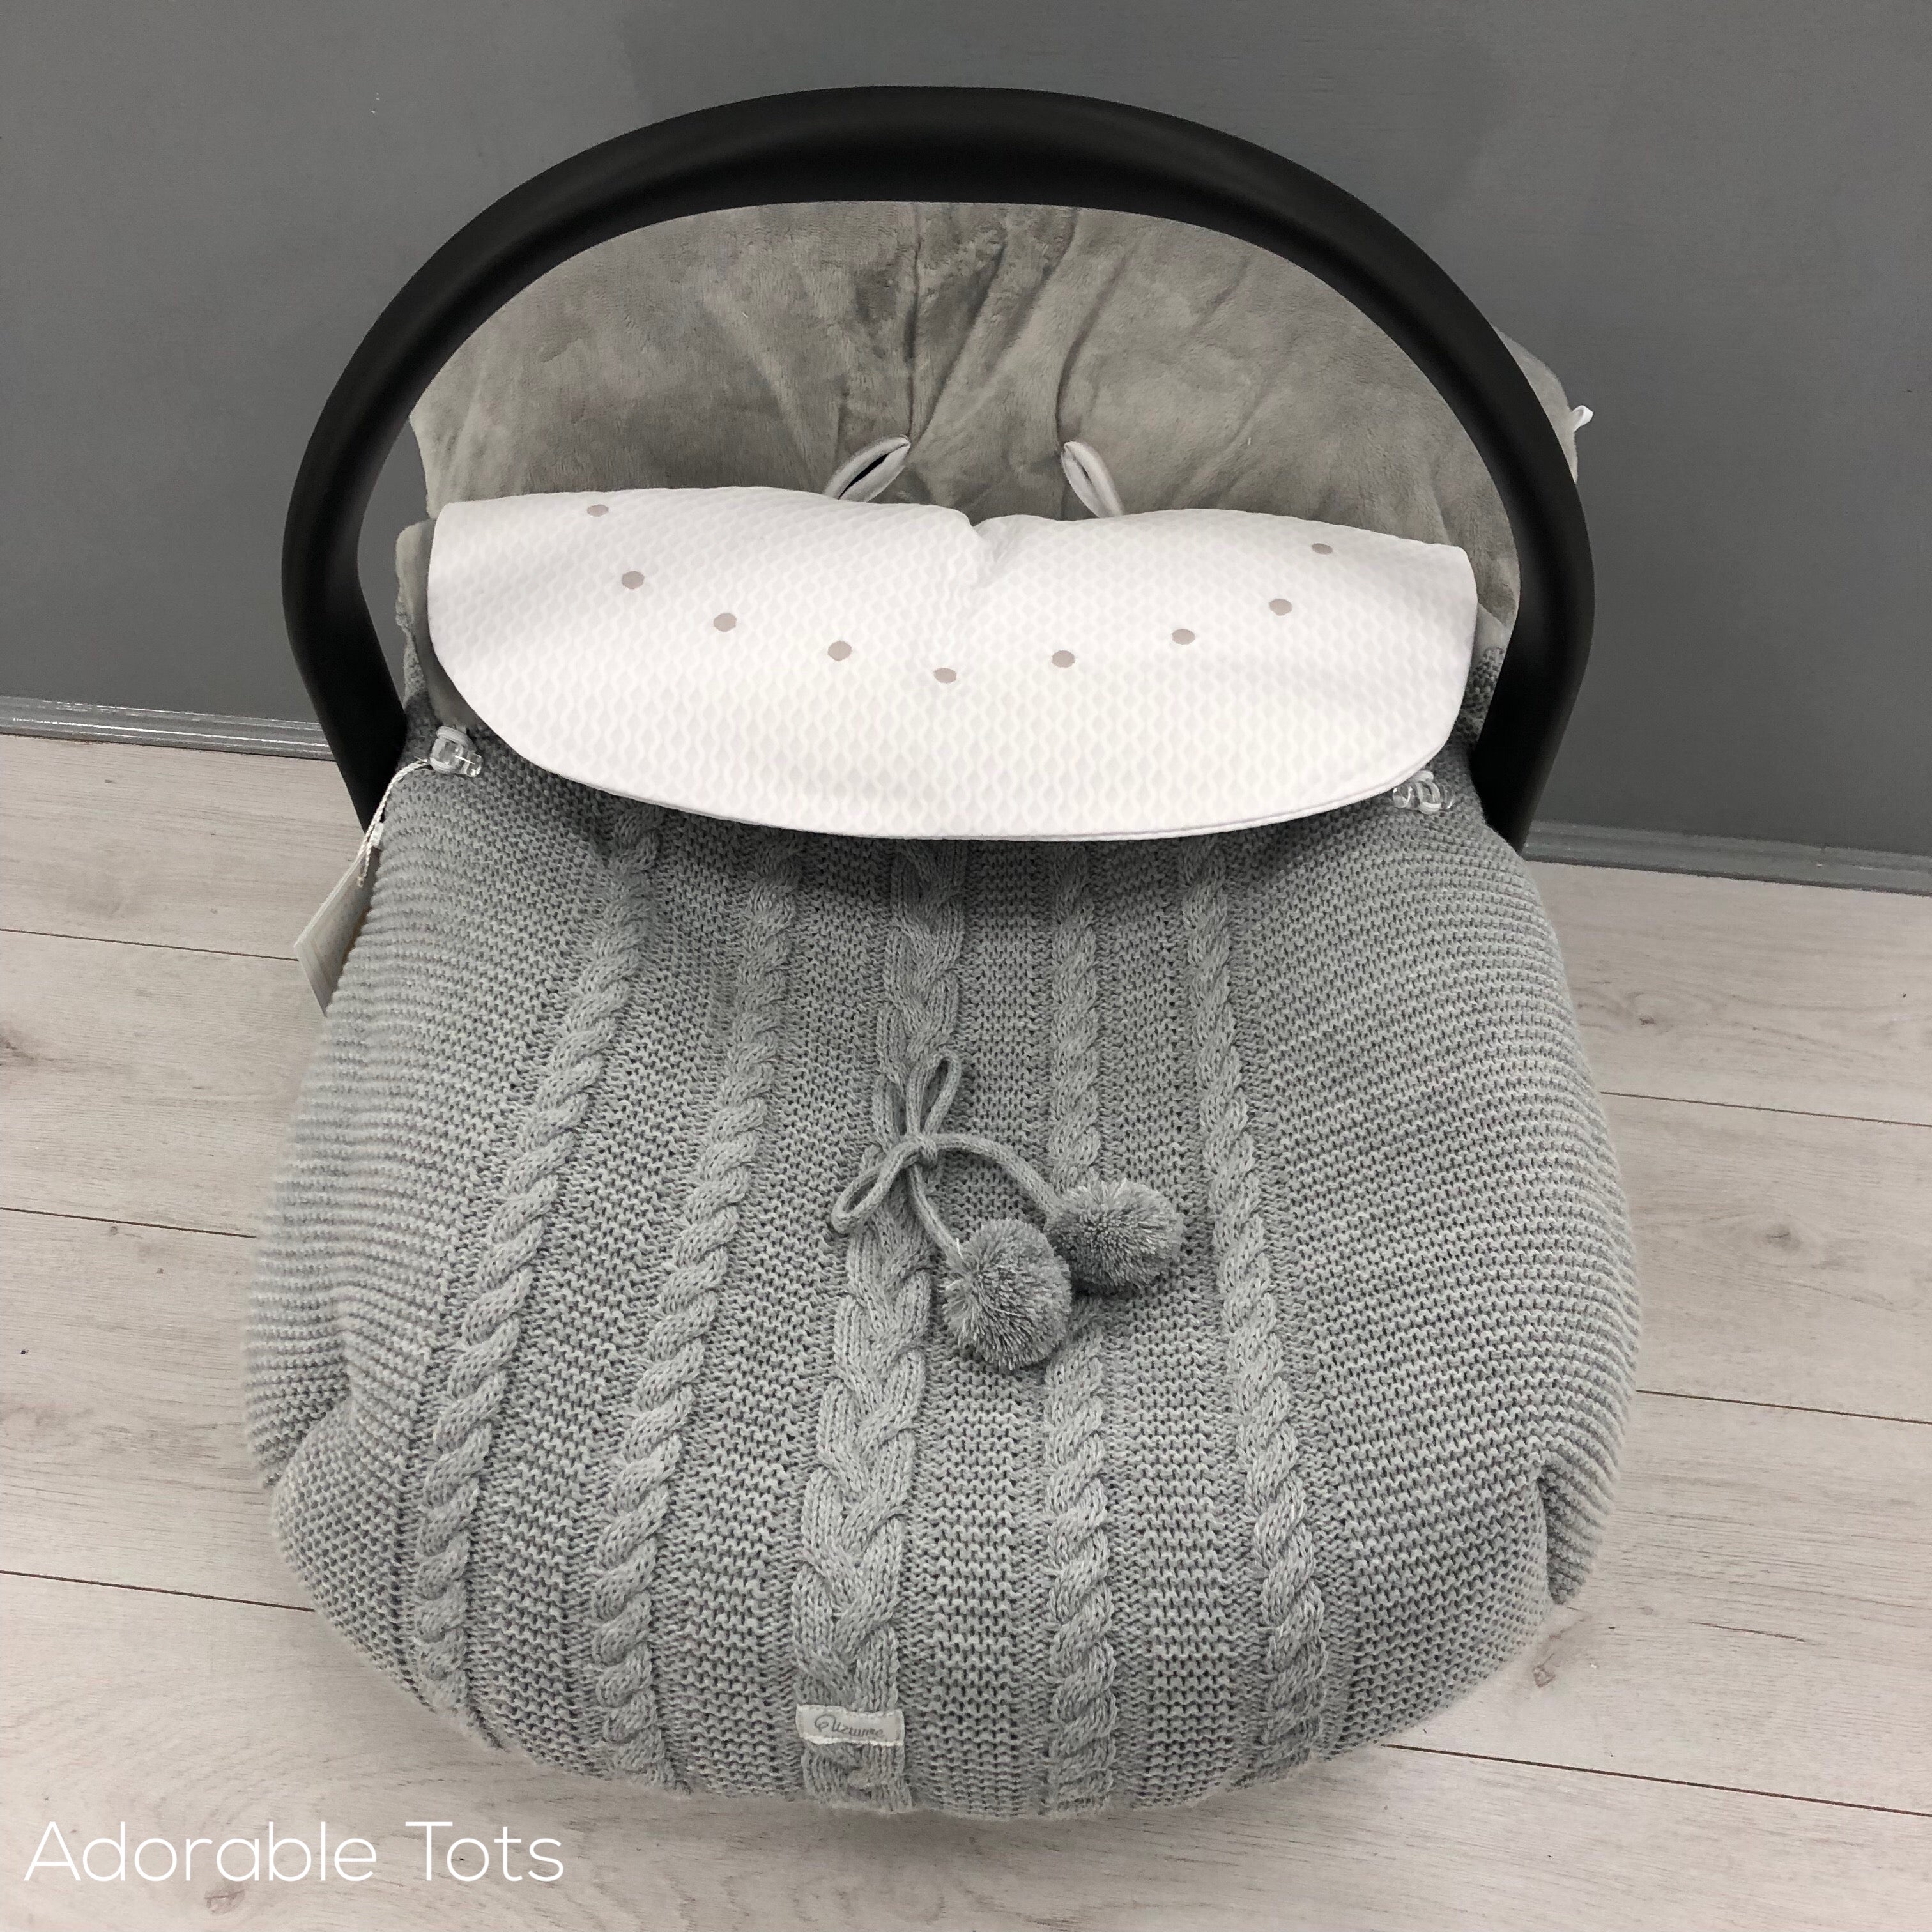 Adorable Tots Universal Infant Carrier Footmuff - Grey